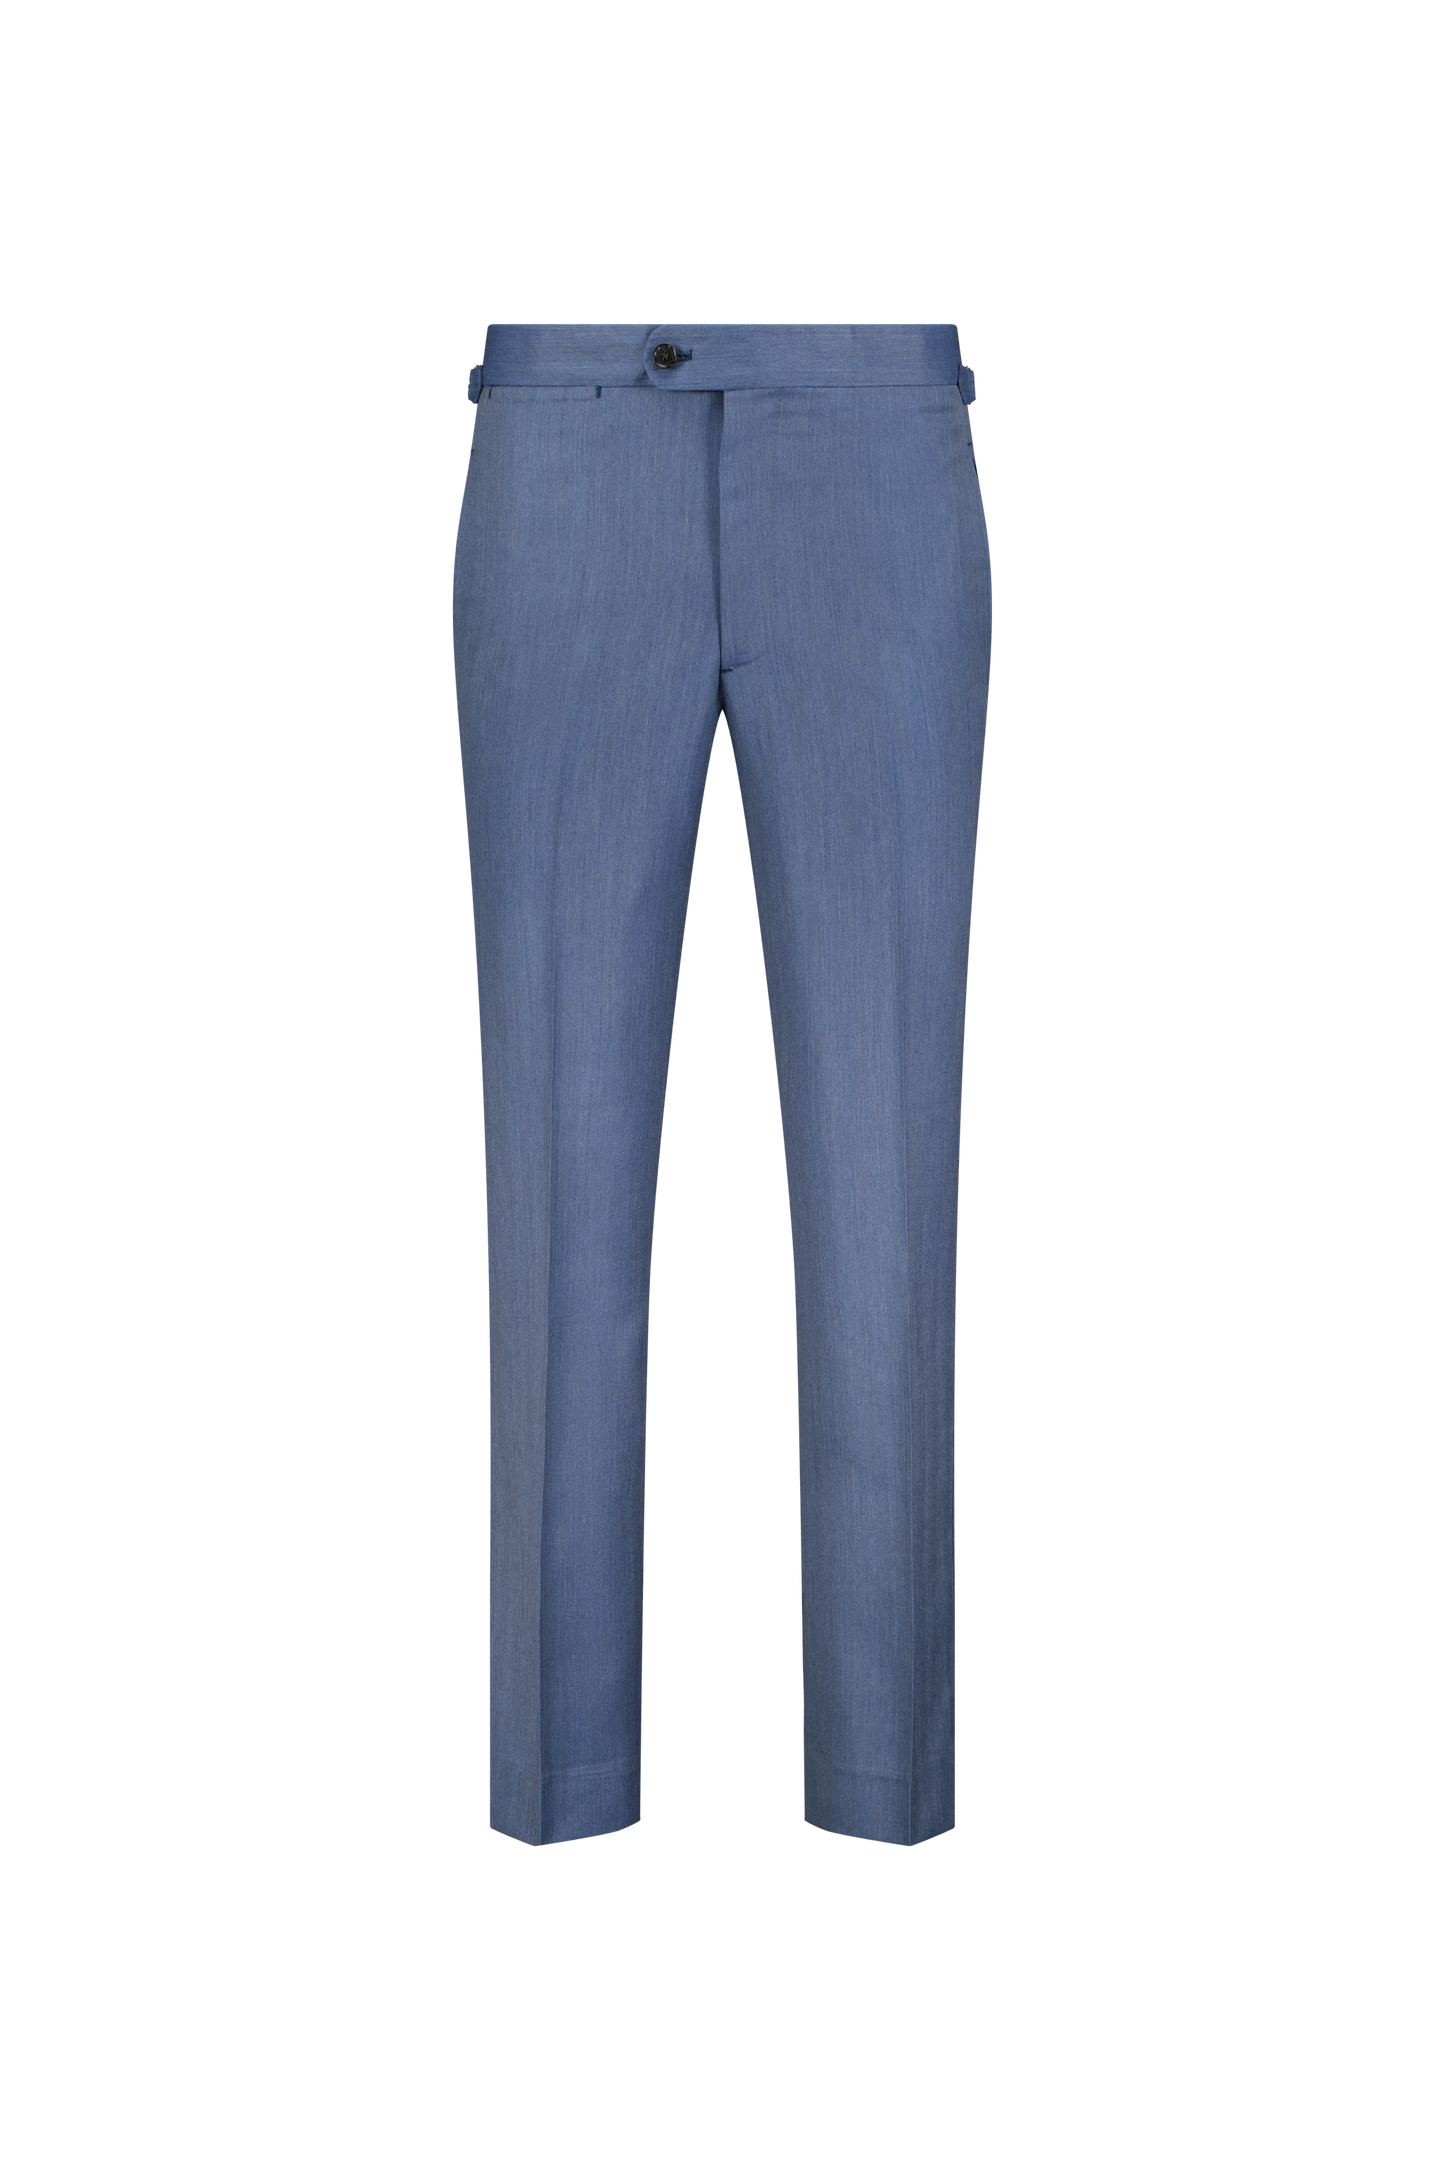 Trousers Zurich blue and light grey Wool and Cashmere herringbone